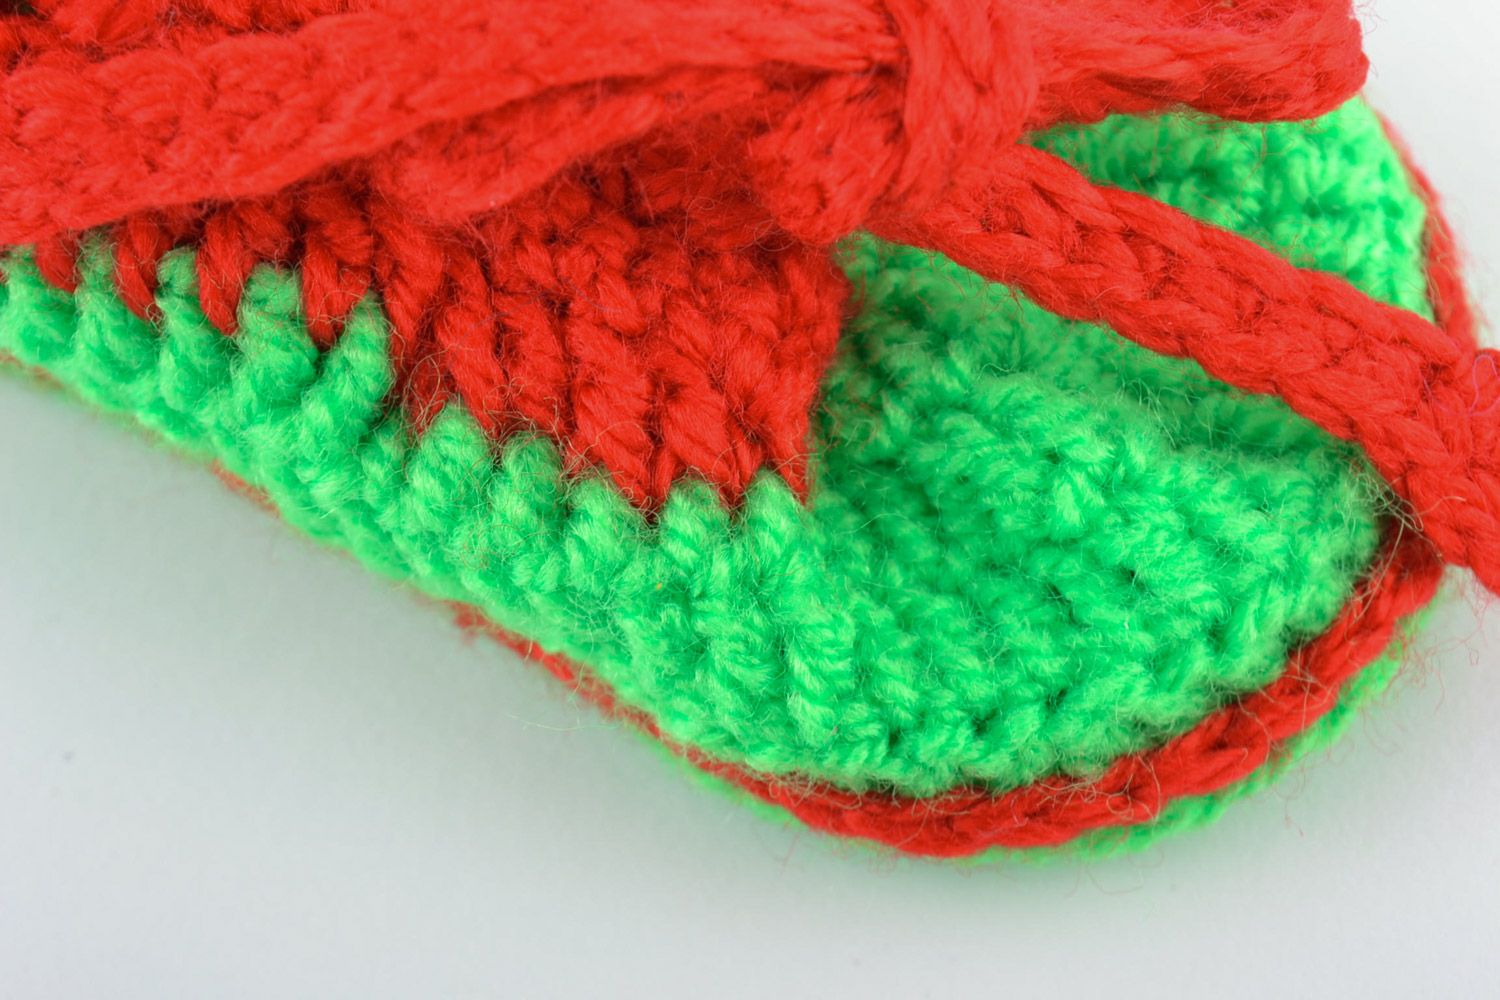 Red and green handmade knitted warm baby booties in the shape of shoes photo 3